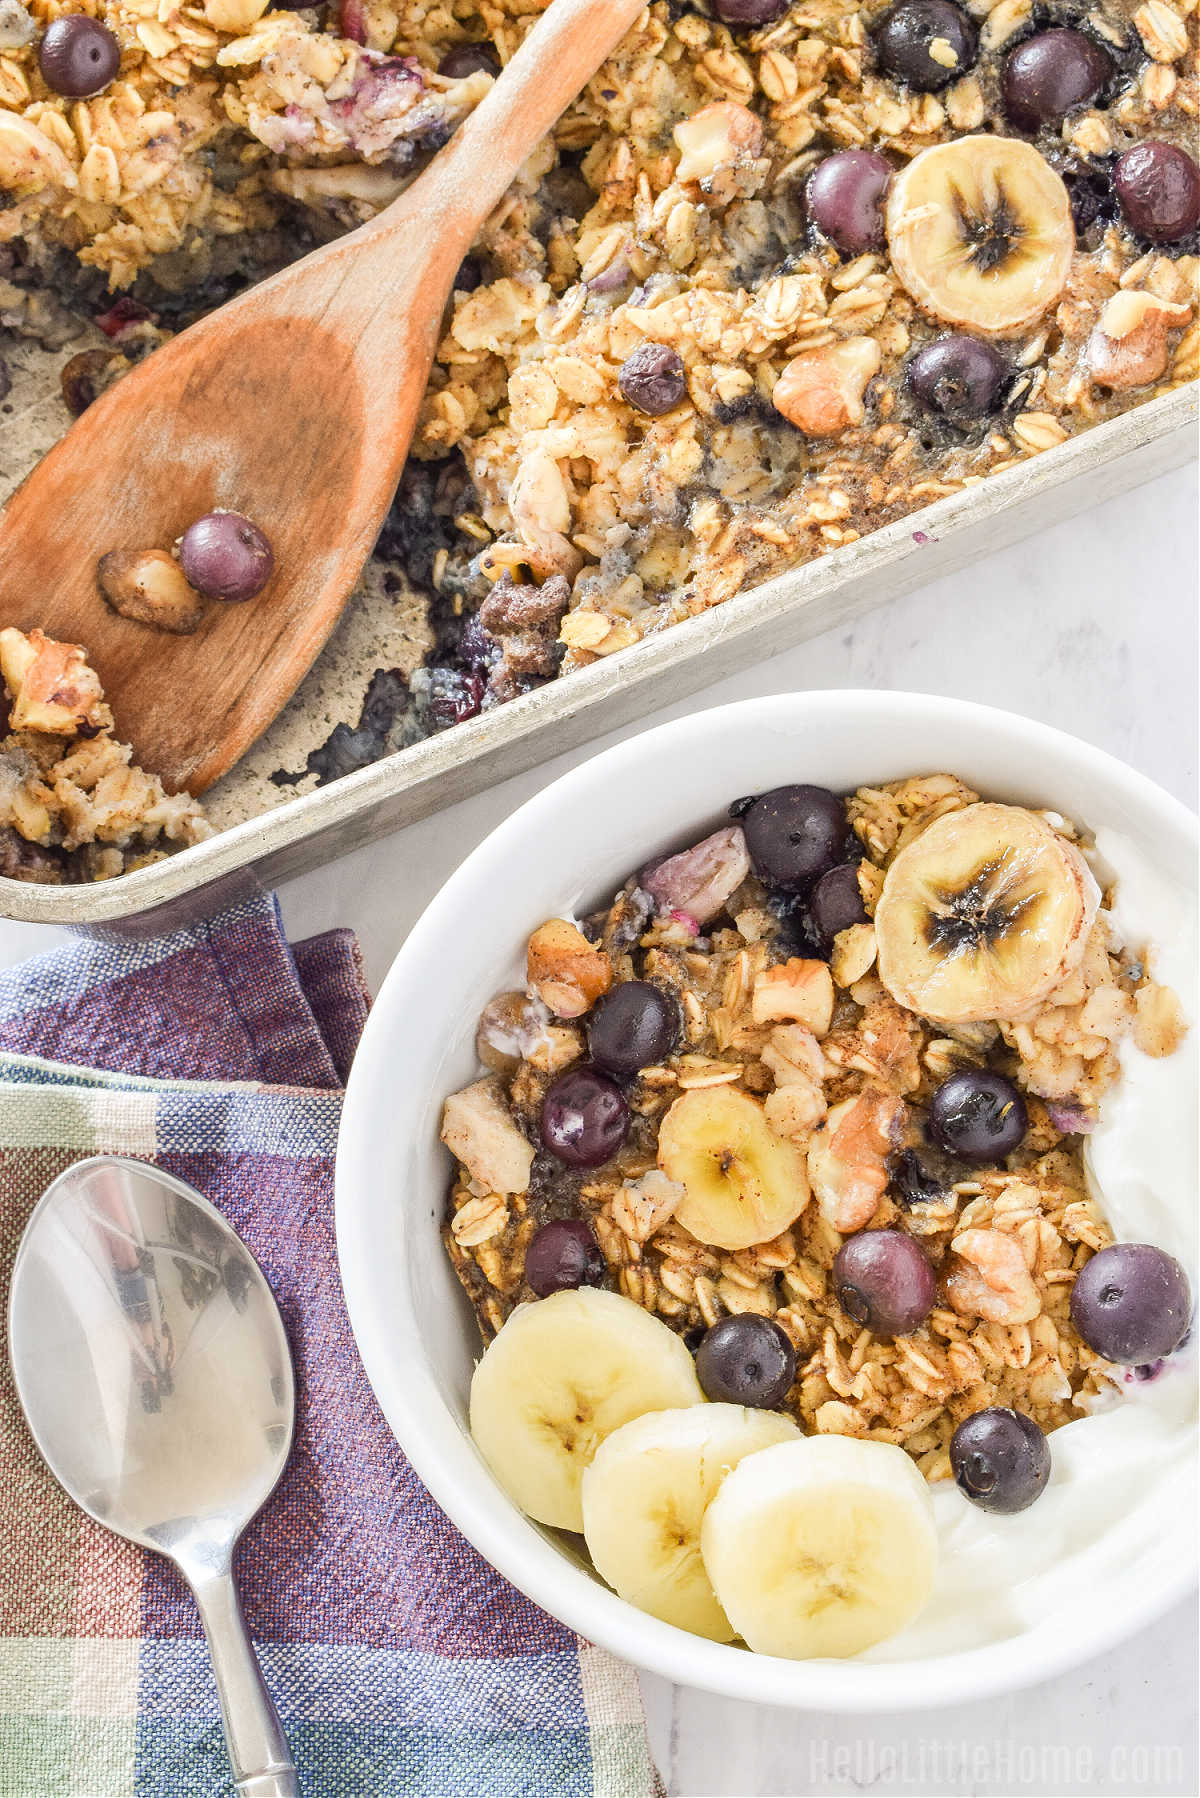 A bowl of Blueberry Banana Baked Oatmeal next to the baking pan.